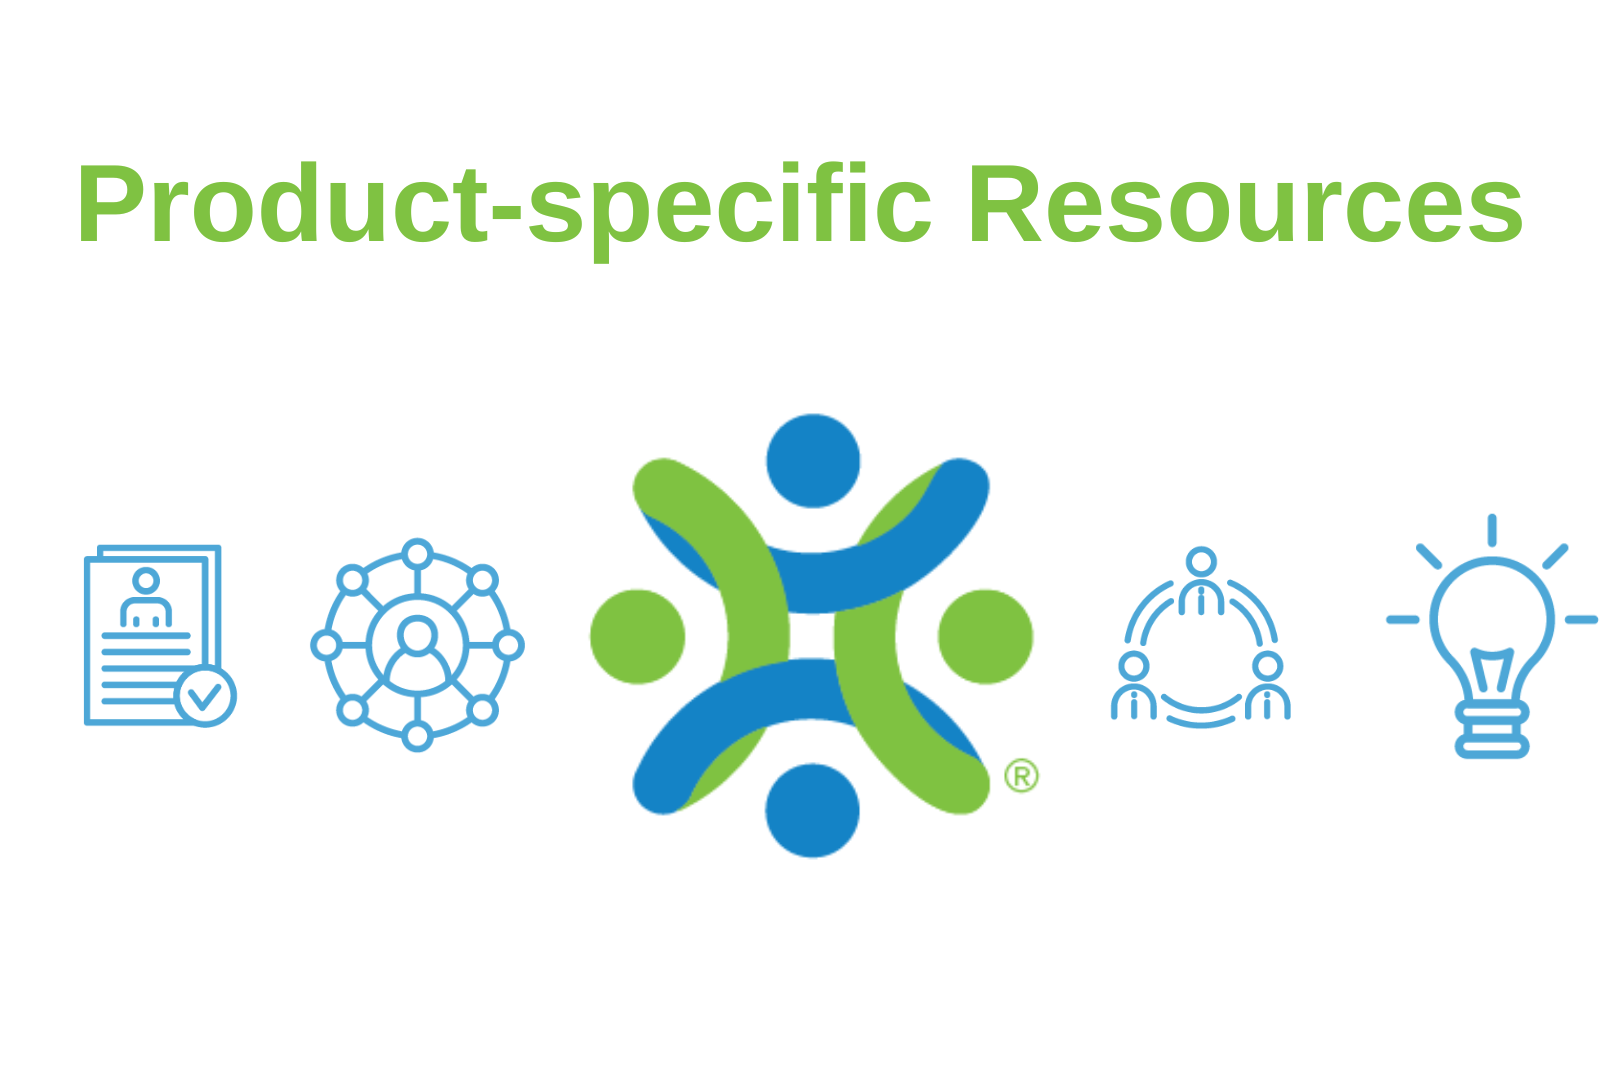 Product-specific Resources